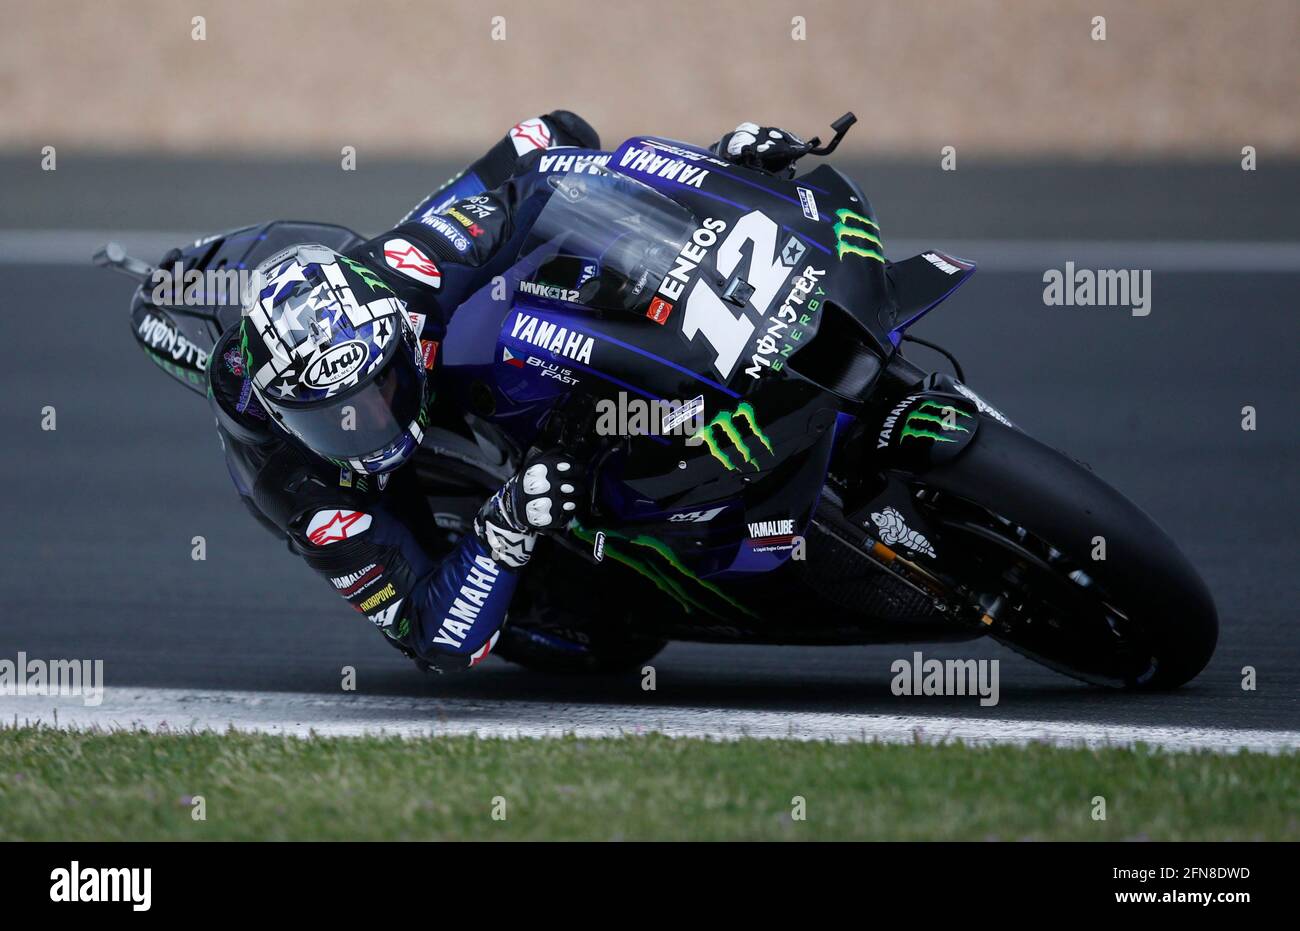 MotoGP - French Grand Prix - Circuit Bugatti, Le Mans, France - May 15,  2021 Monster Energy Yamaha MotoGP's Maverick Vinales in action during  qualifying REUTERS/Stephane Mahe Stock Photo - Alamy